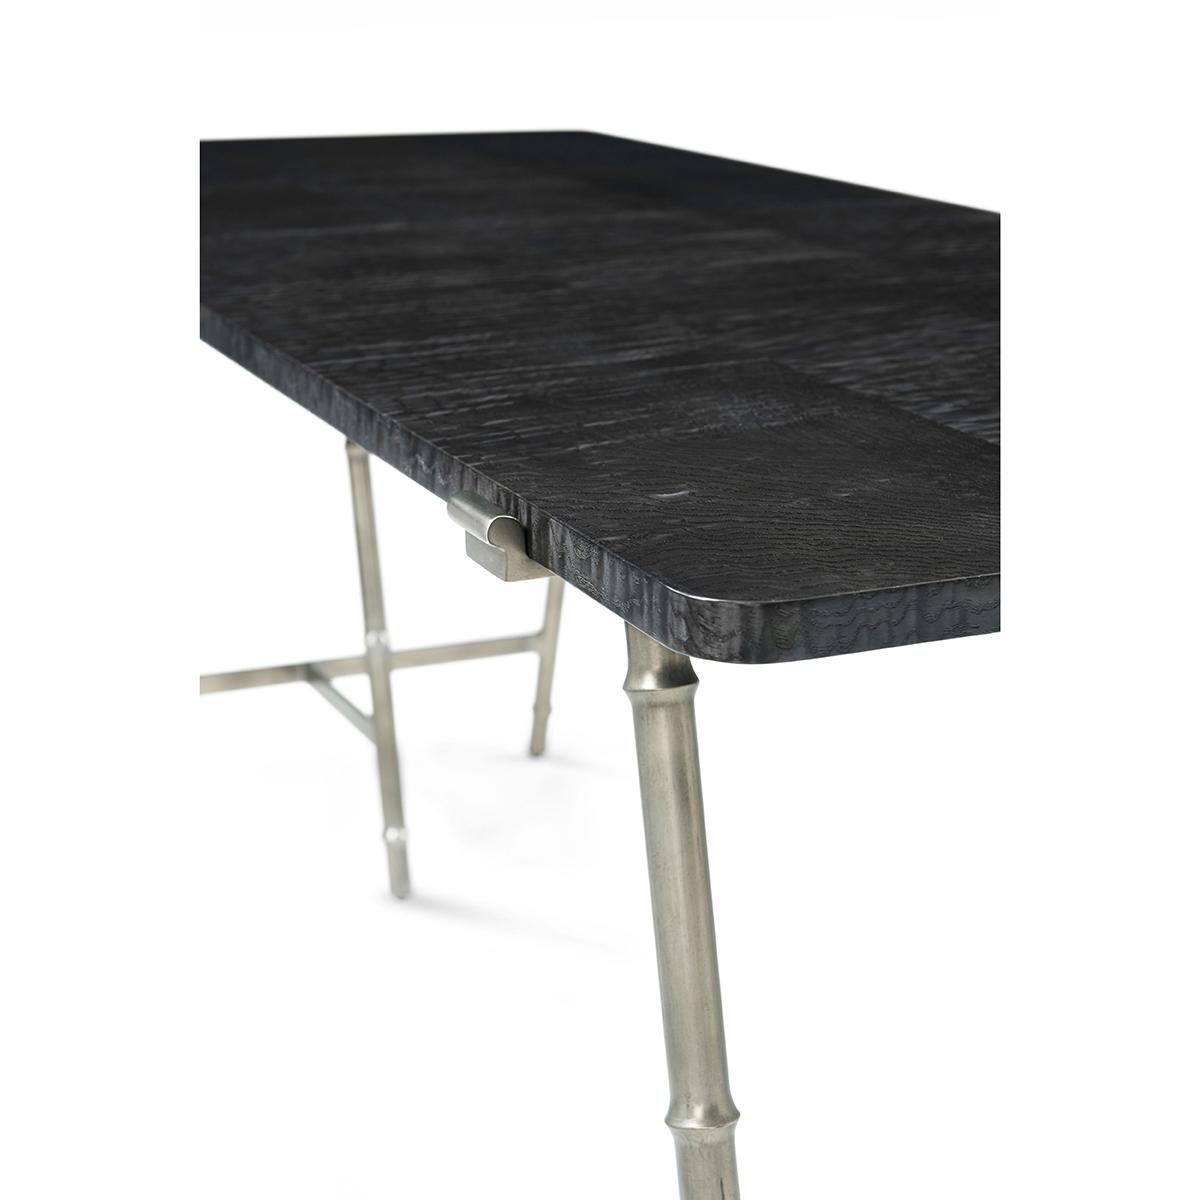 Vietnamese Mid Century Writing Table - Silent Black For Sale